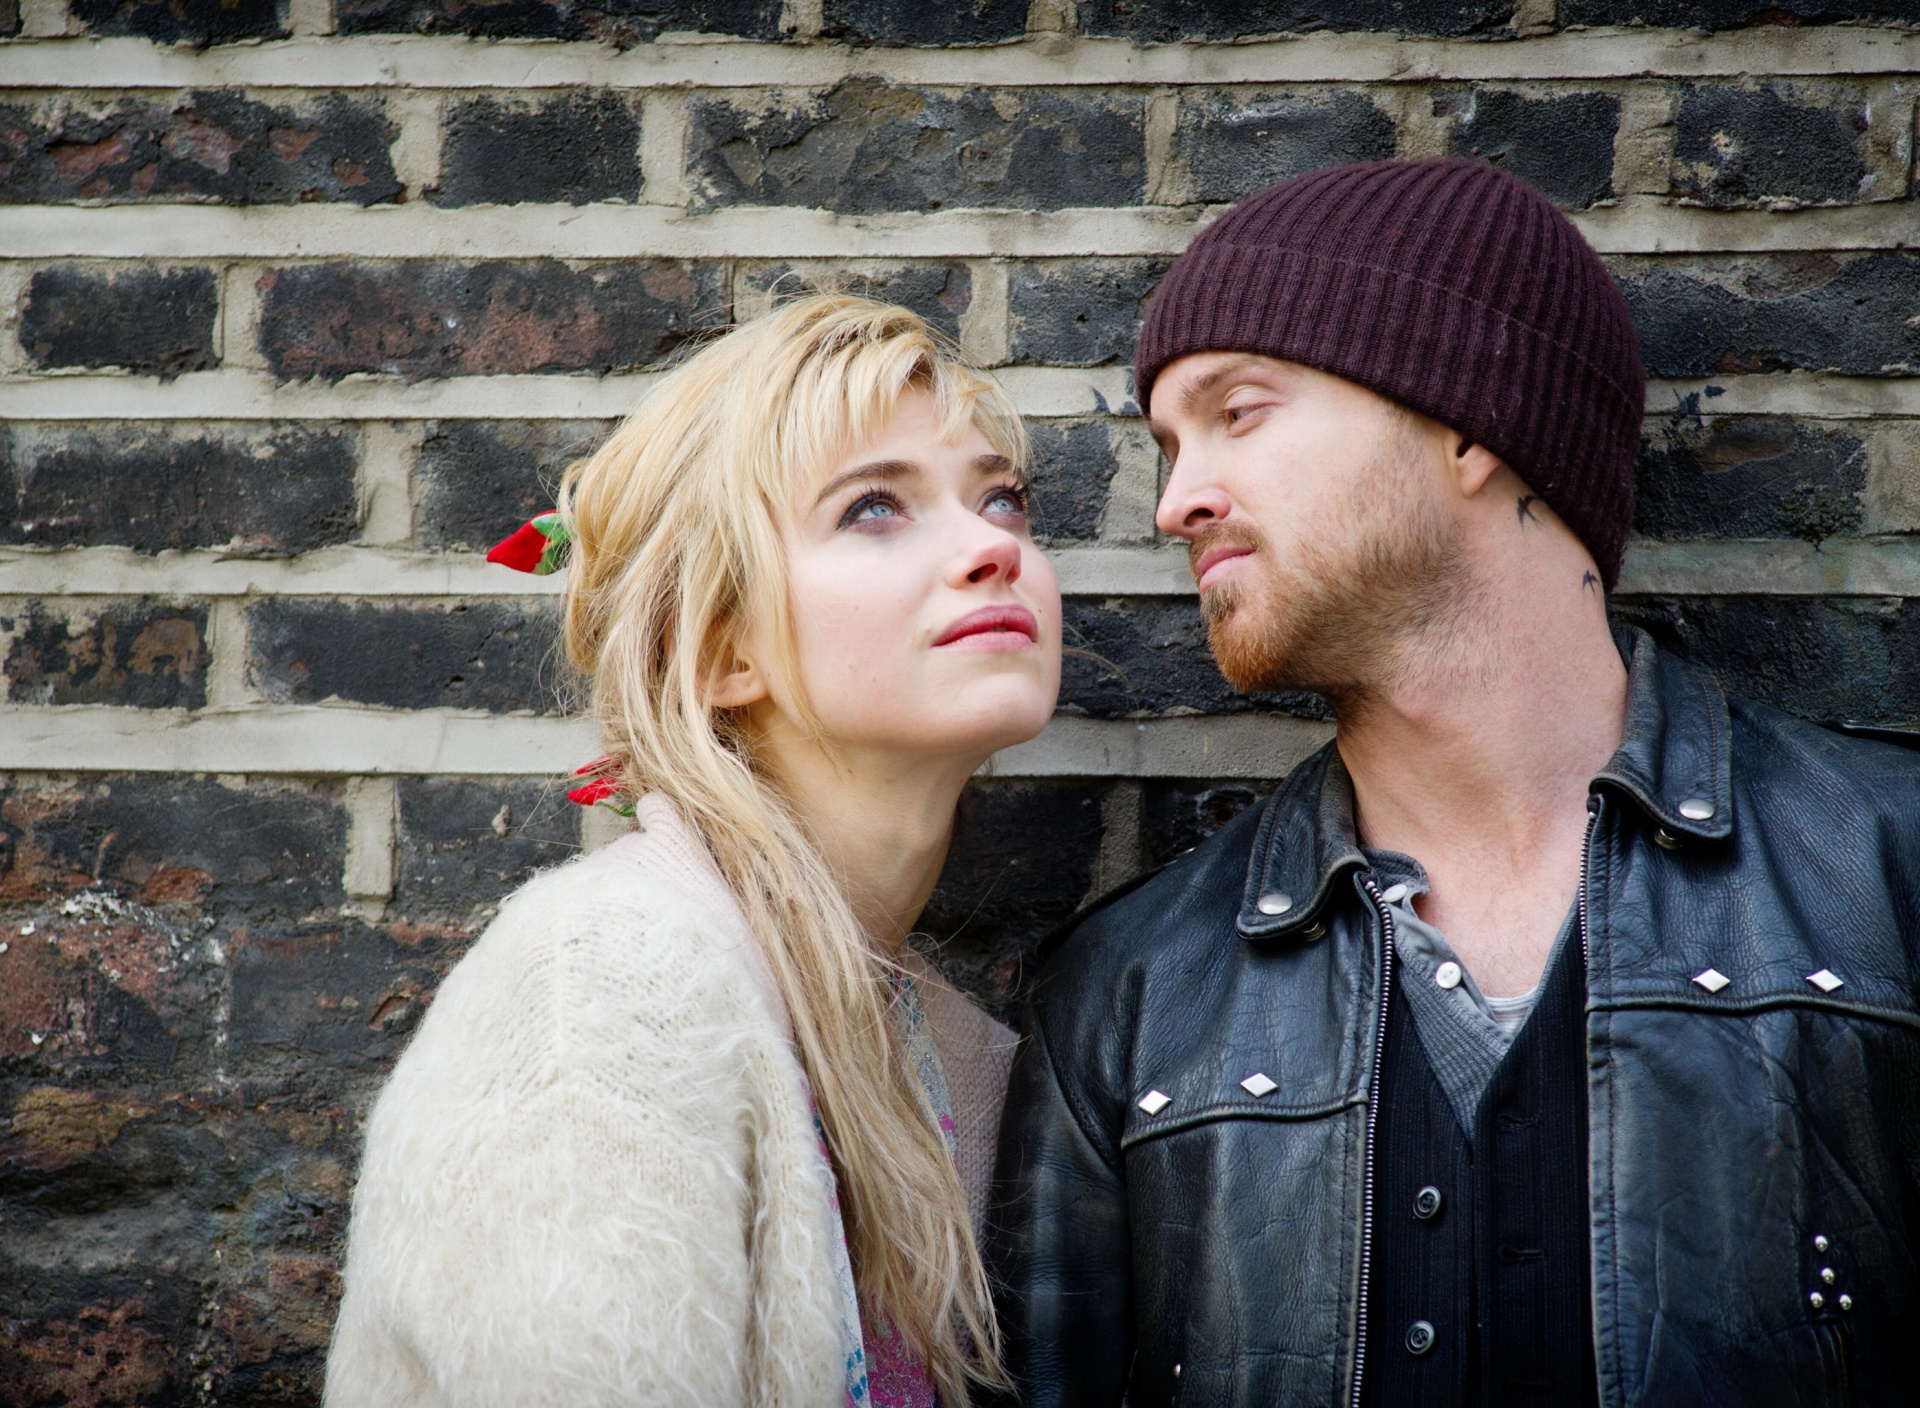 Das A Long Way Down with Aaron Paul and Imogen Poots Wallpaper 1920x1408